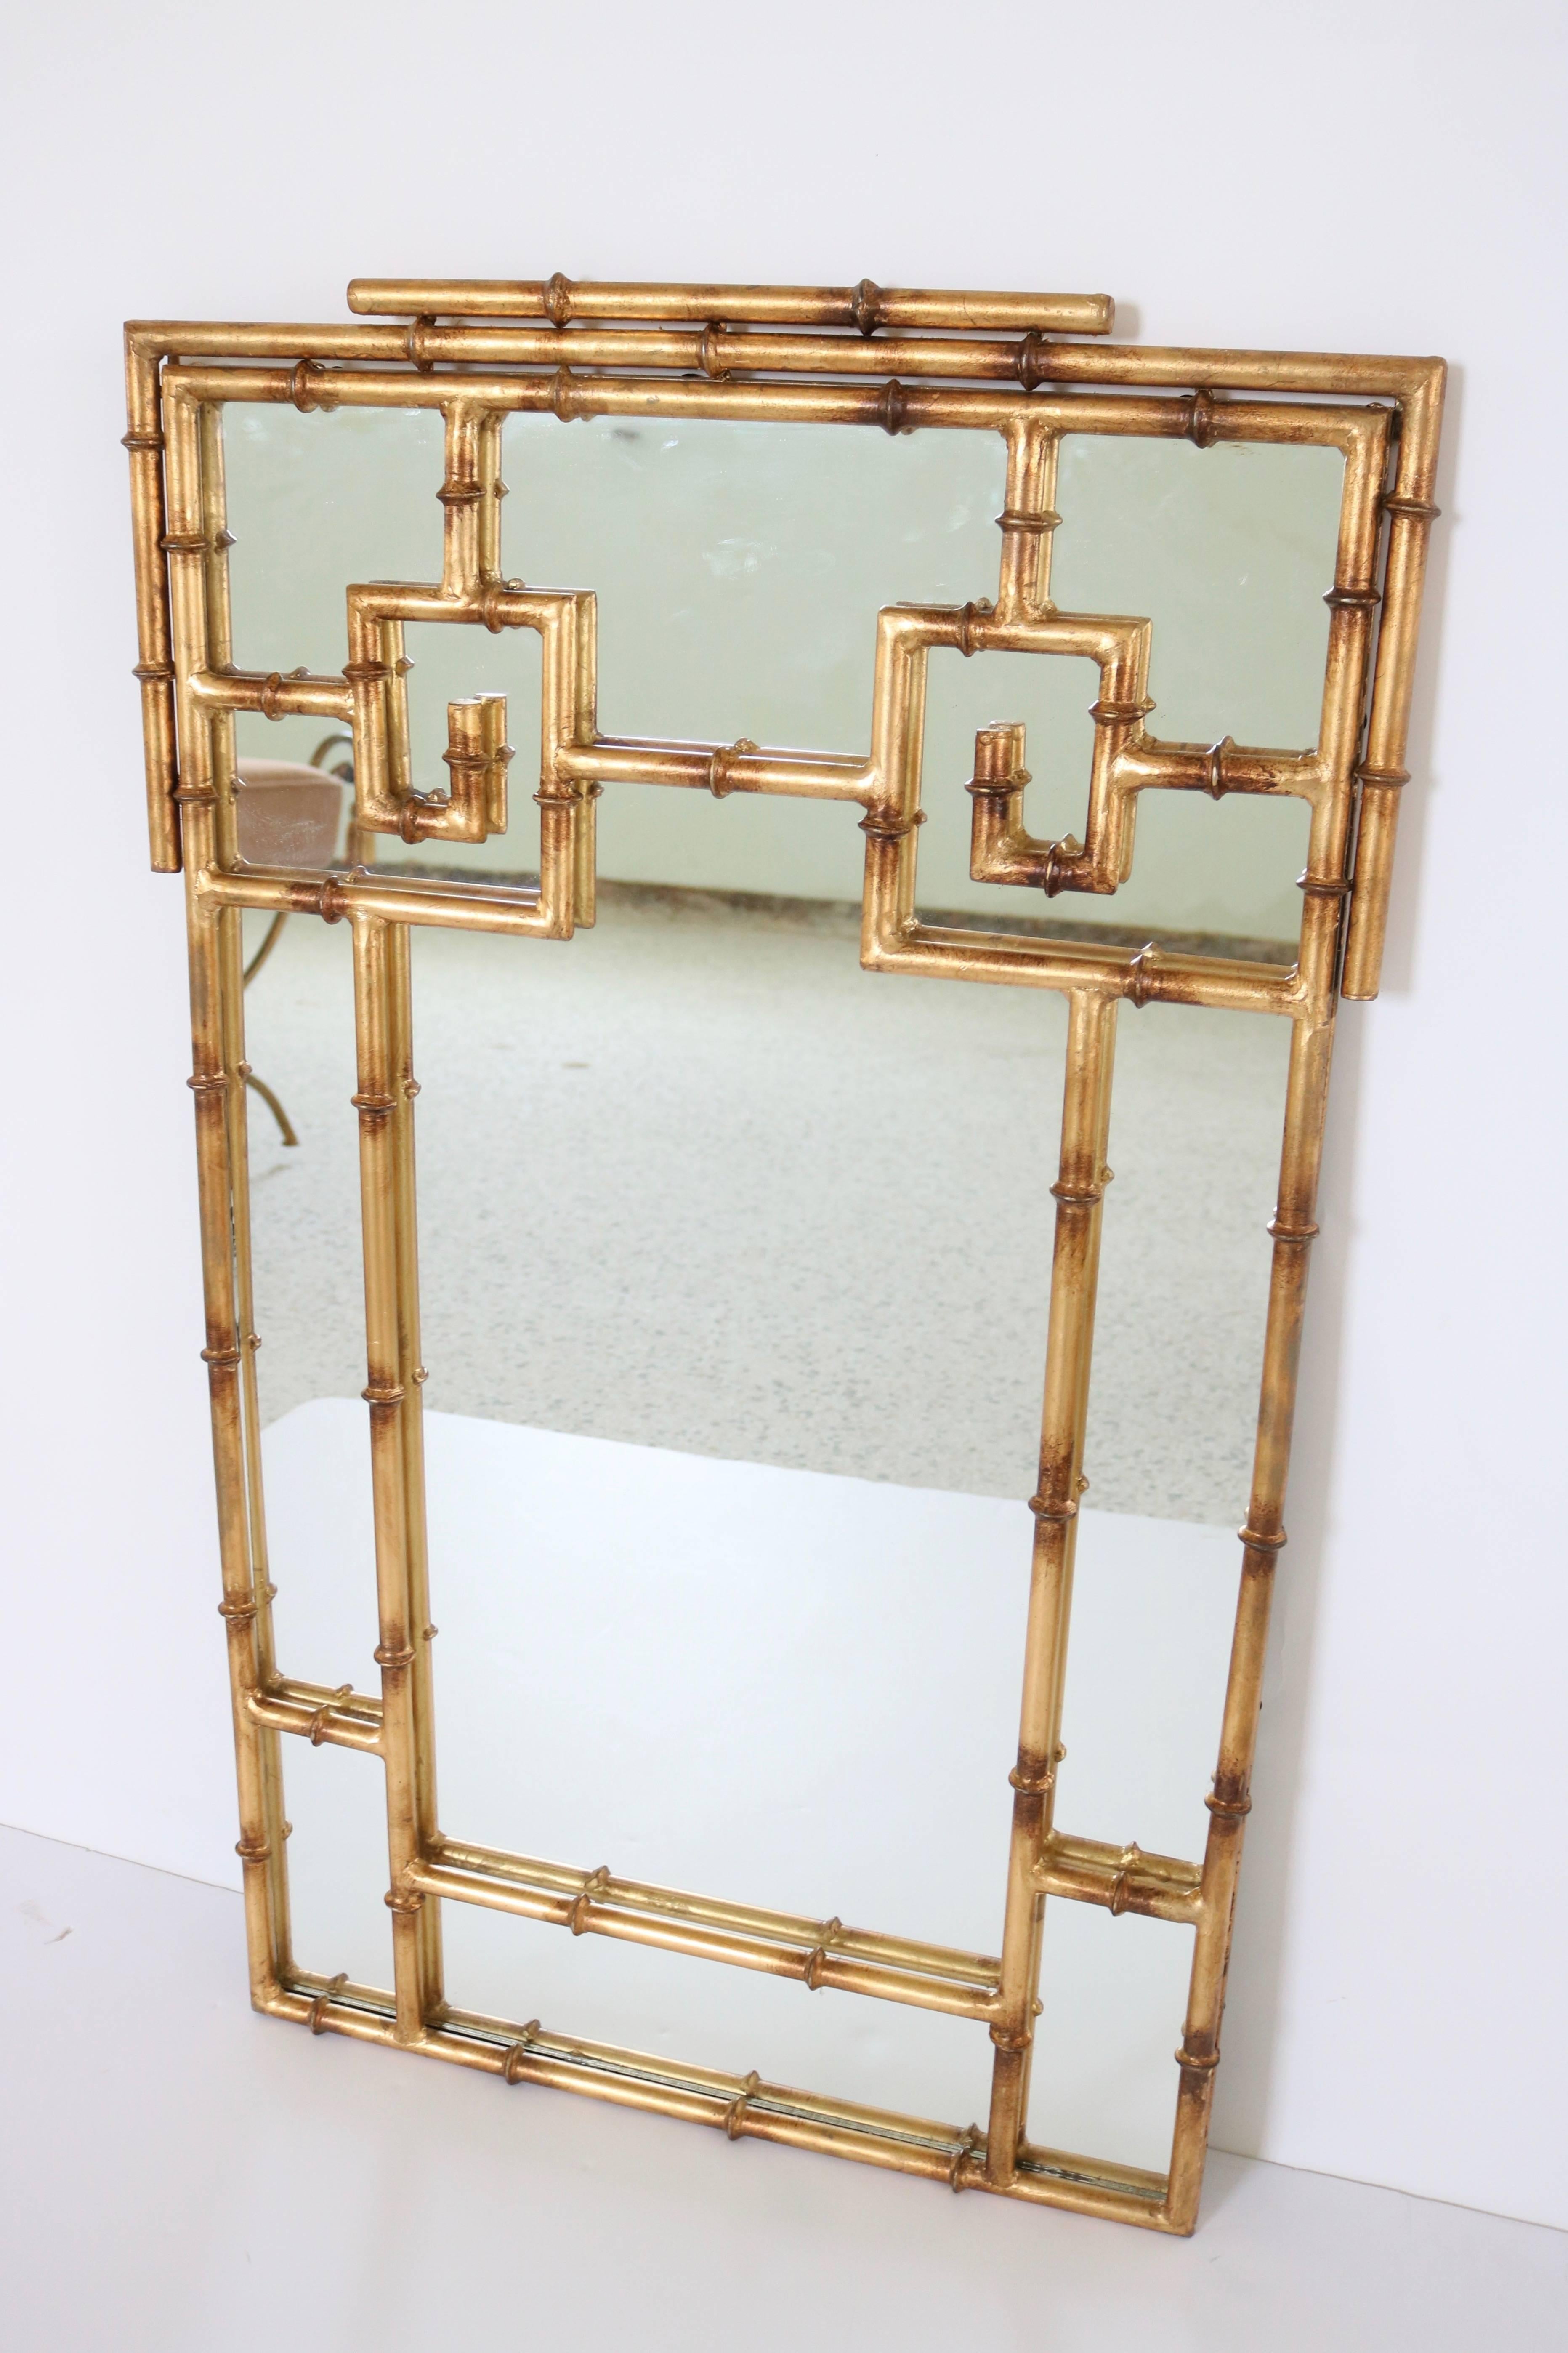 This stylish mirror is very much in the style of pieces created and adored by Tony Duquette during the height of the Hollywood Regency period. 

For best net trade price or additional questions regarding this item, please click the 